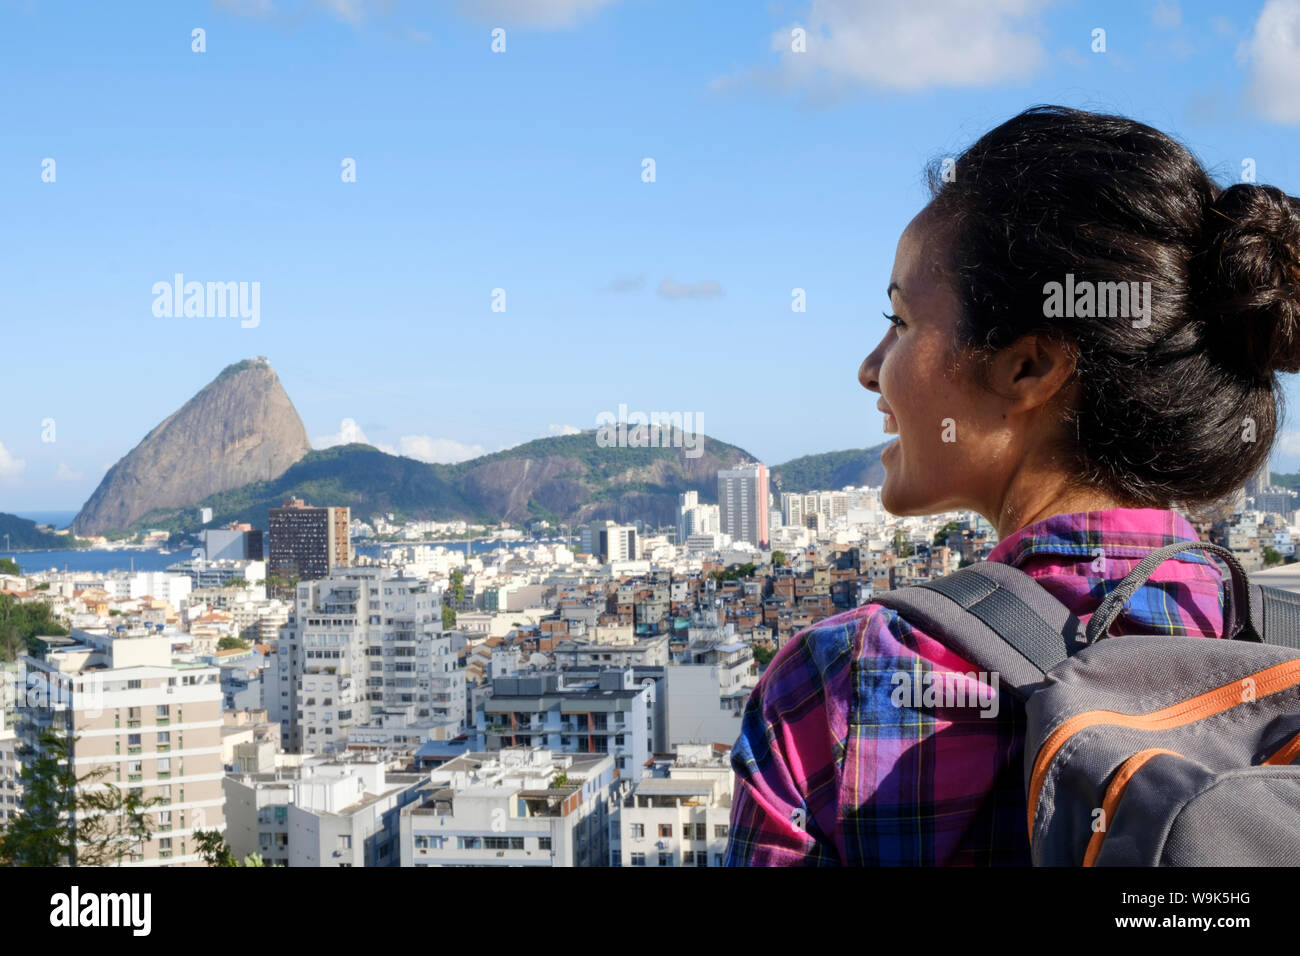 Young backpacker on her mobile phone in central Rio de Janeiro with the Sugar Loaf in the distance, Rio de Janeiro, Brazil, South America Stock Photo